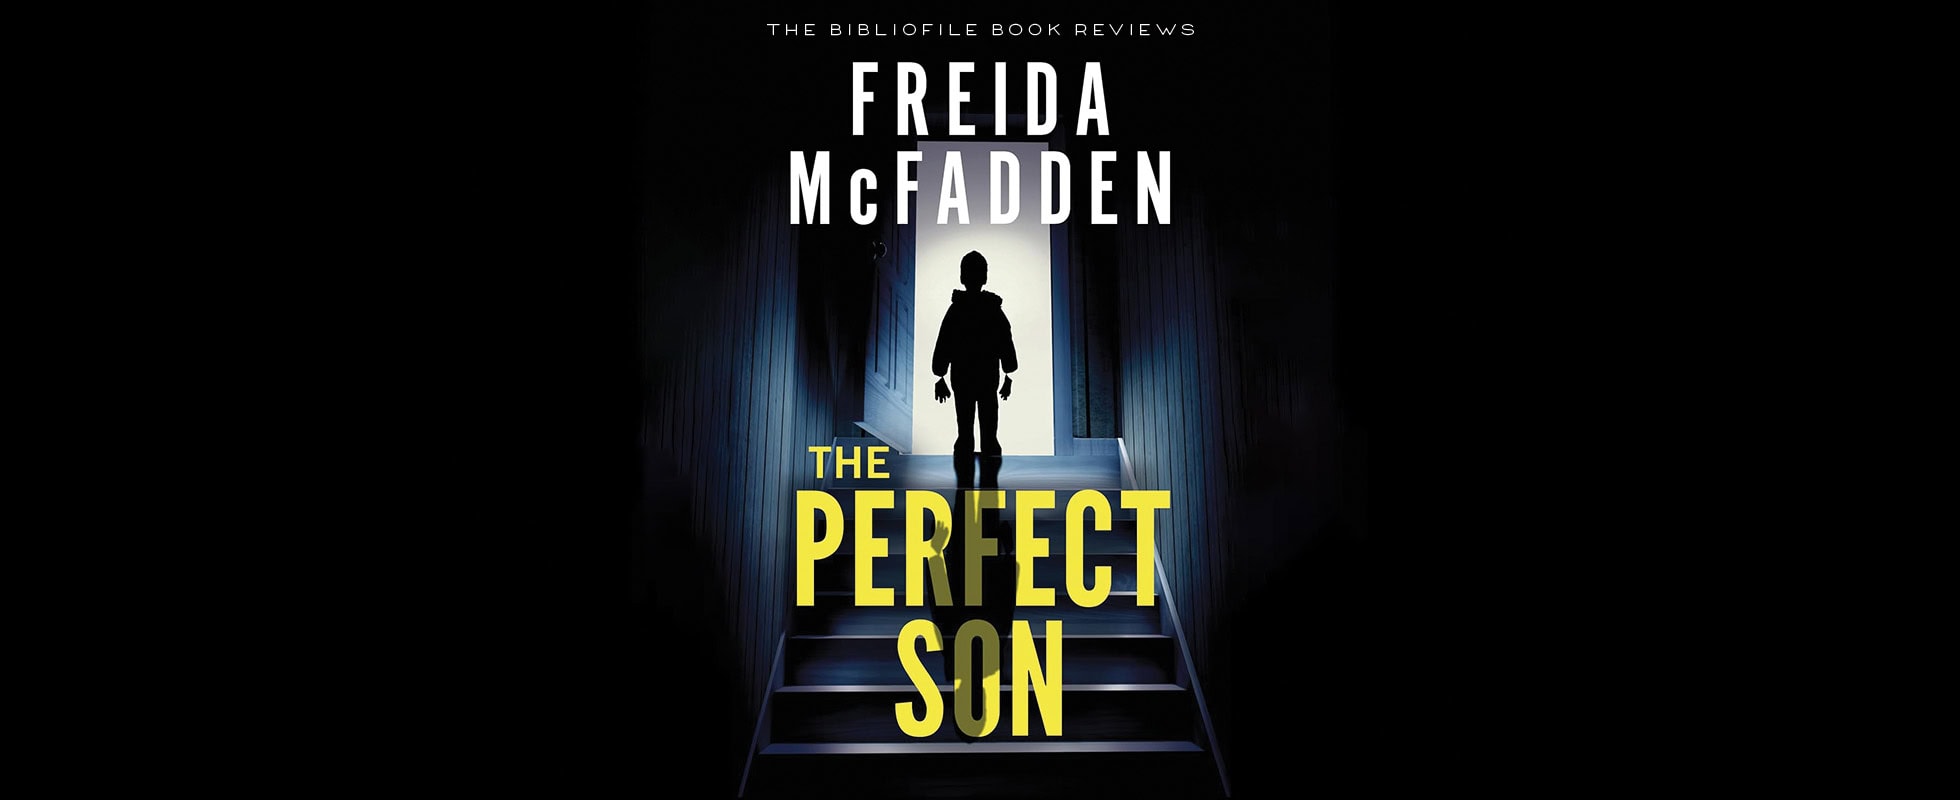 the perfect son by freida mcfadden book review plot summary synopsis recap discussion spoilers endling explanations